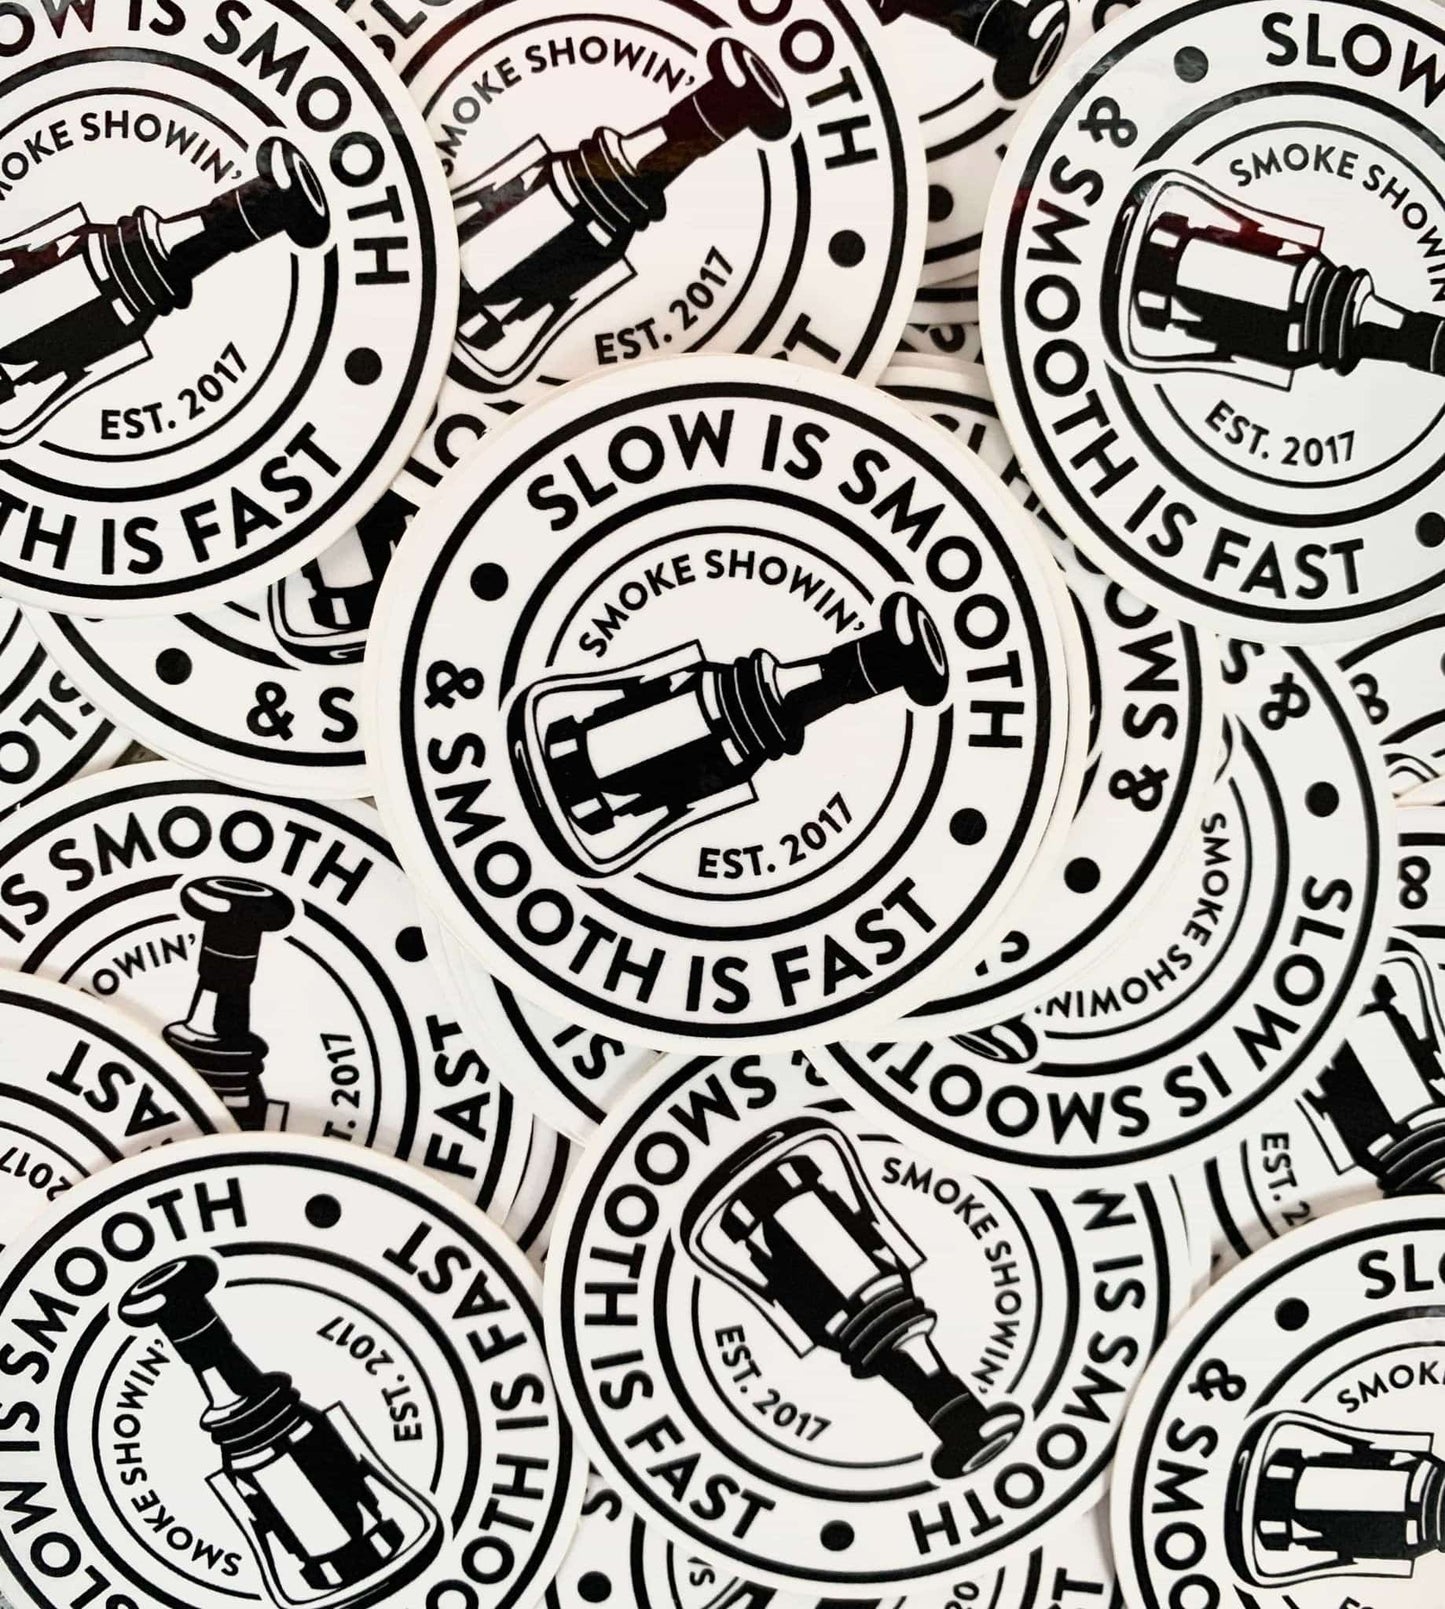 Chief Miller Smooth is Fast Sticker Apparel